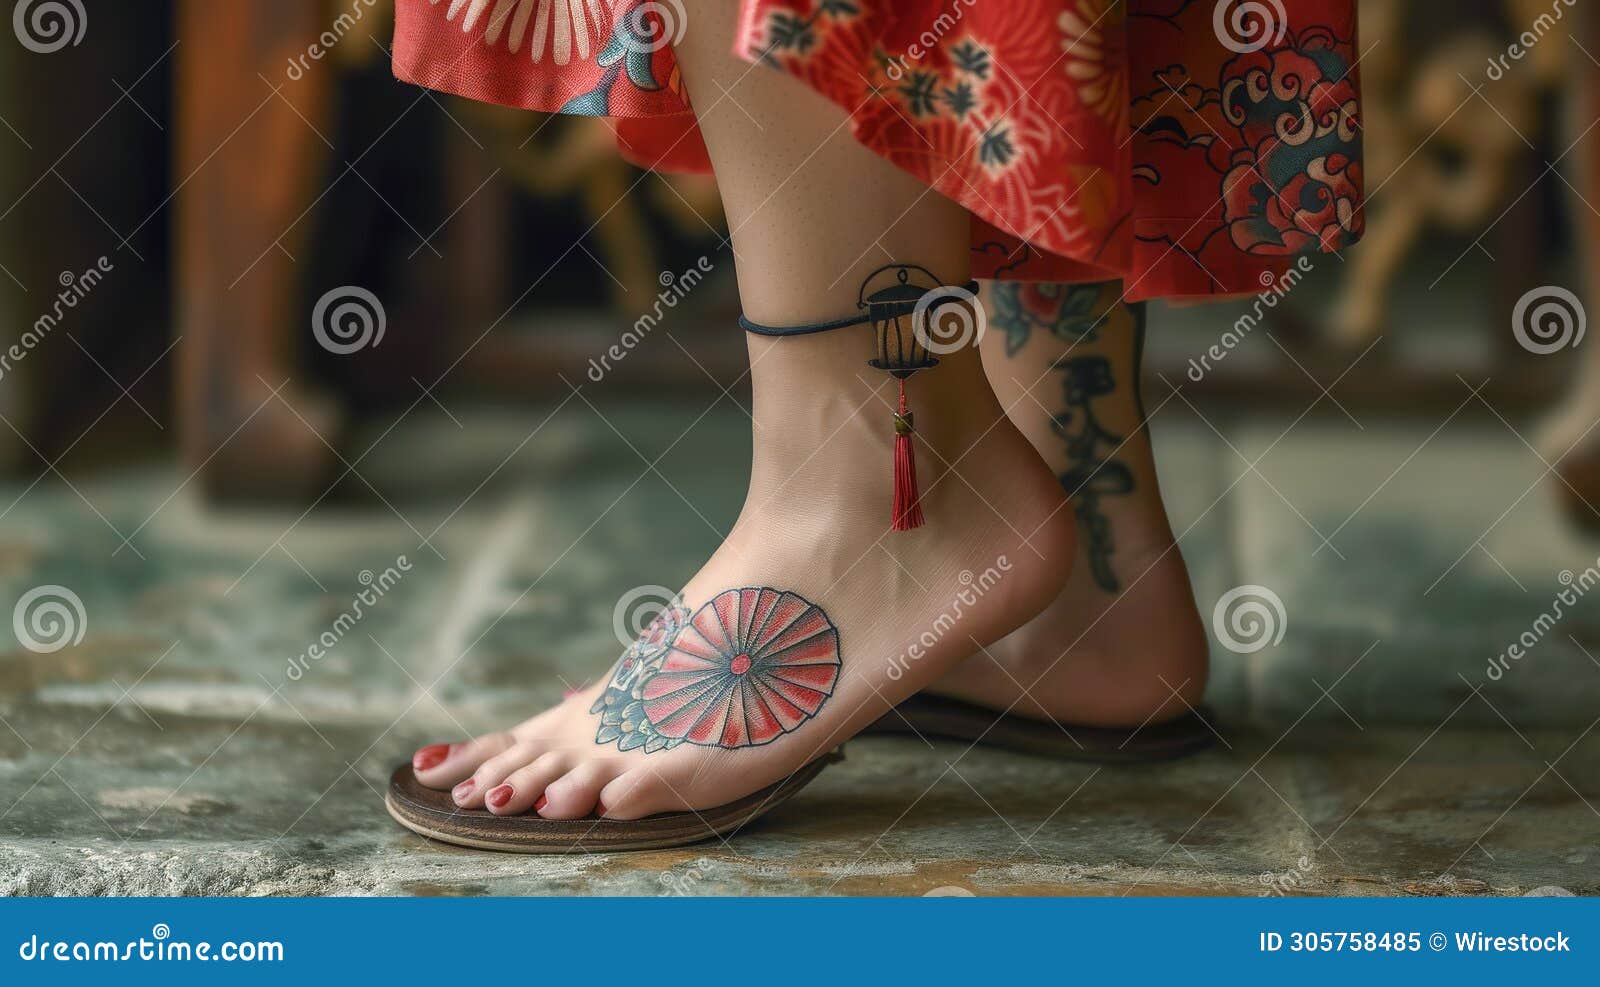 thigh to ankle tattoos